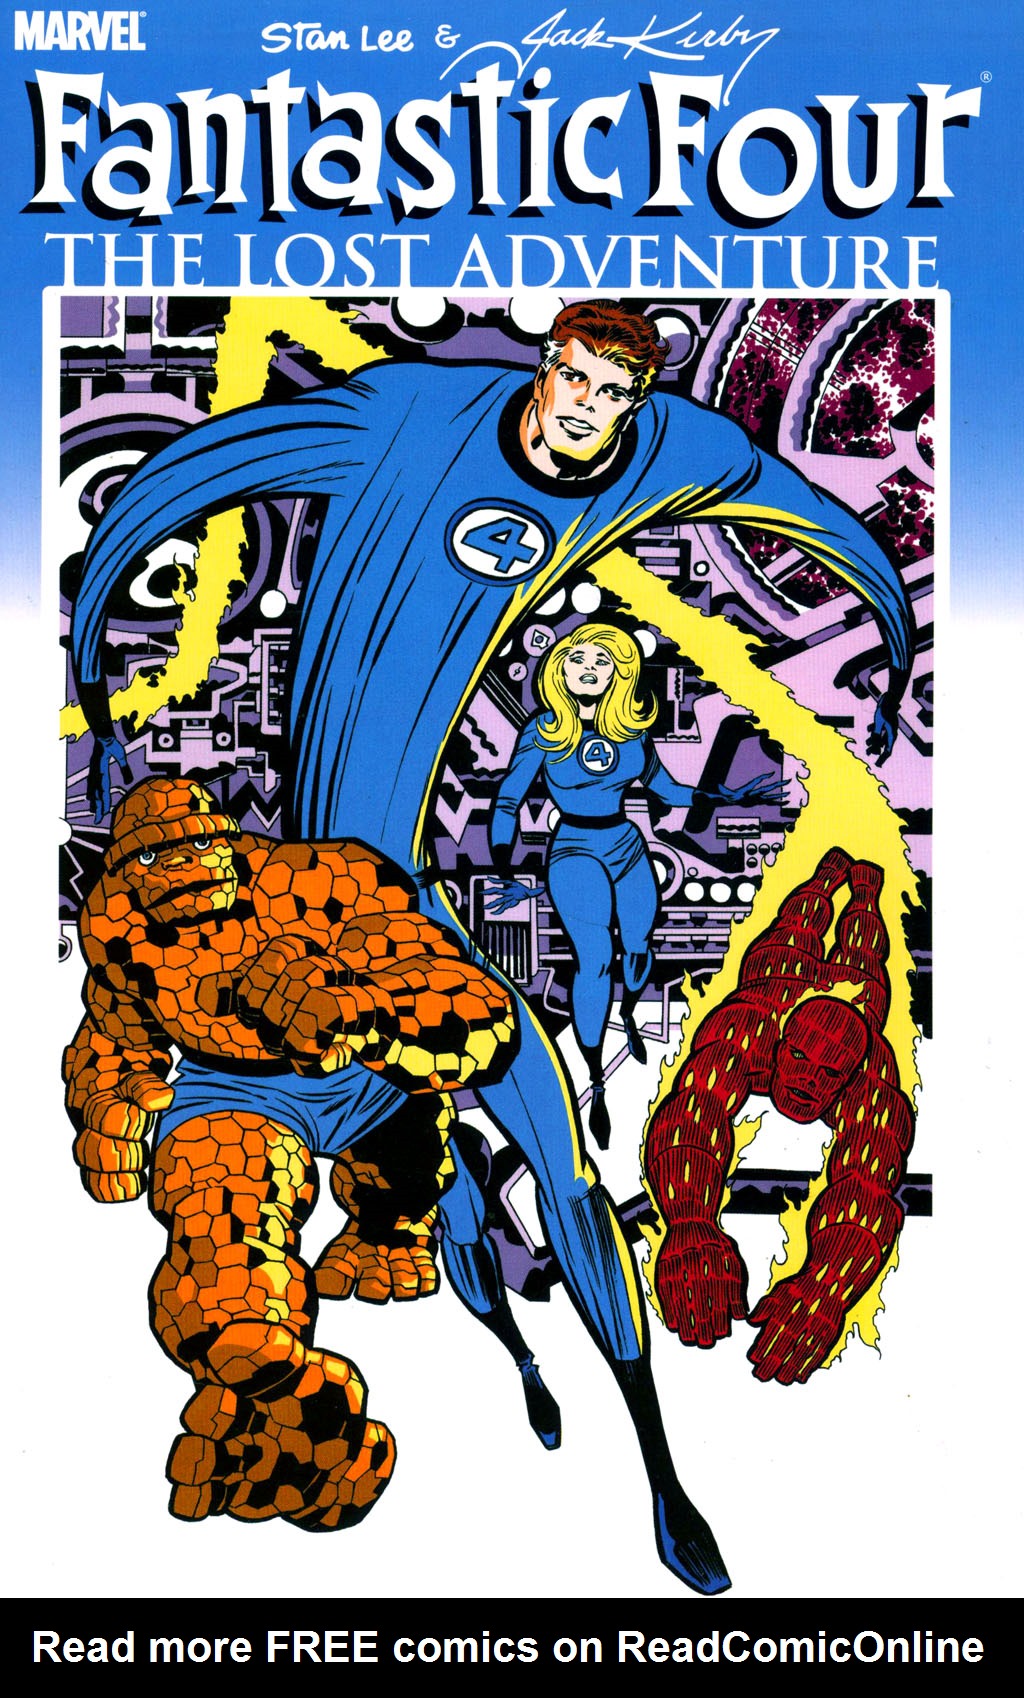 Fantastic Four: The Lost Adventure Full Page 1